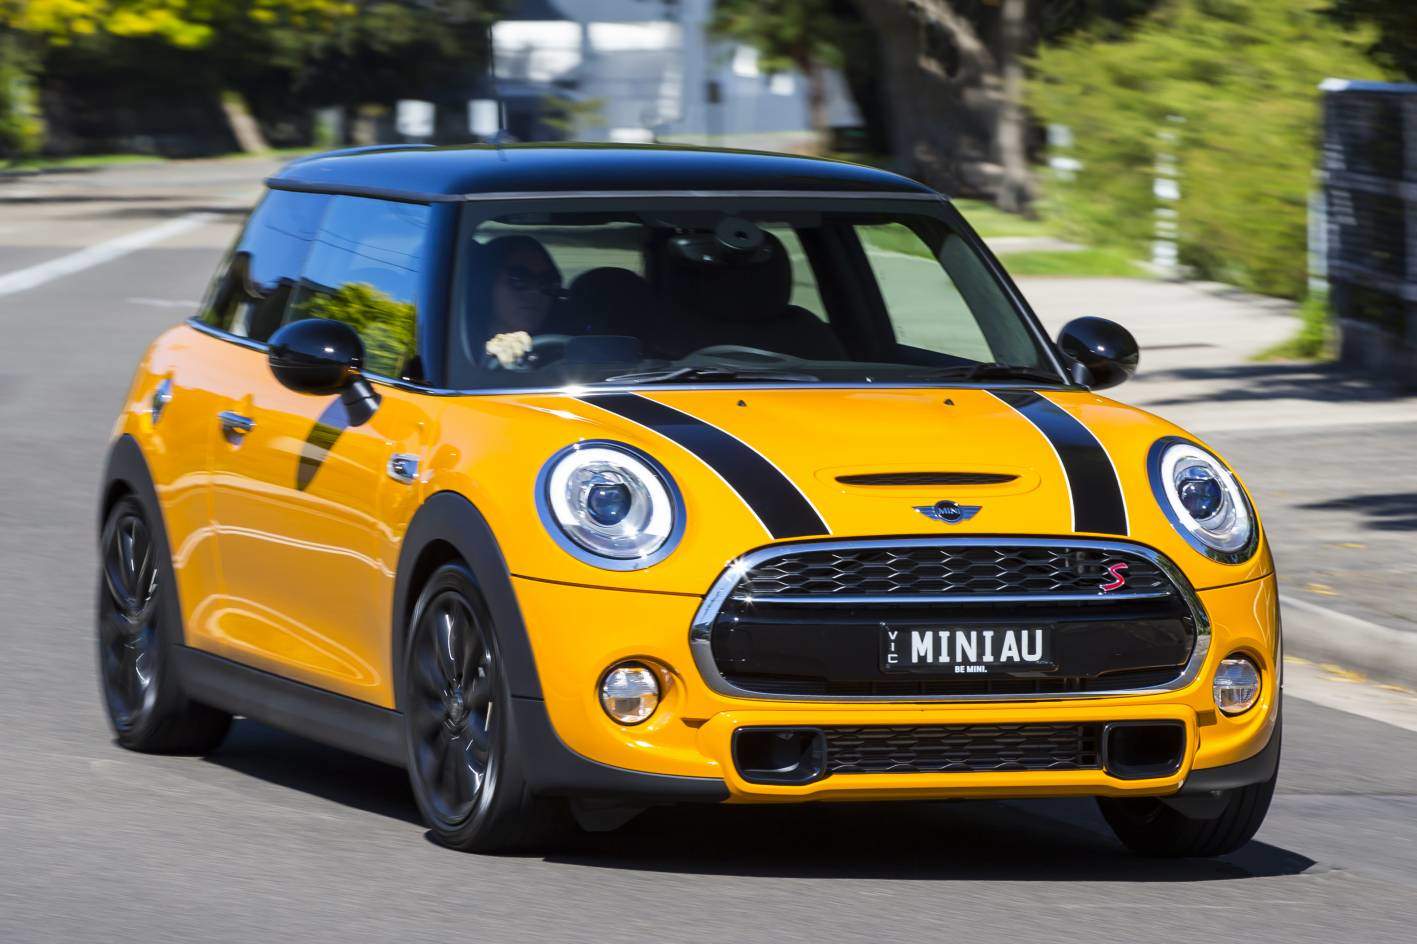 Accolades for MINI in German car awards